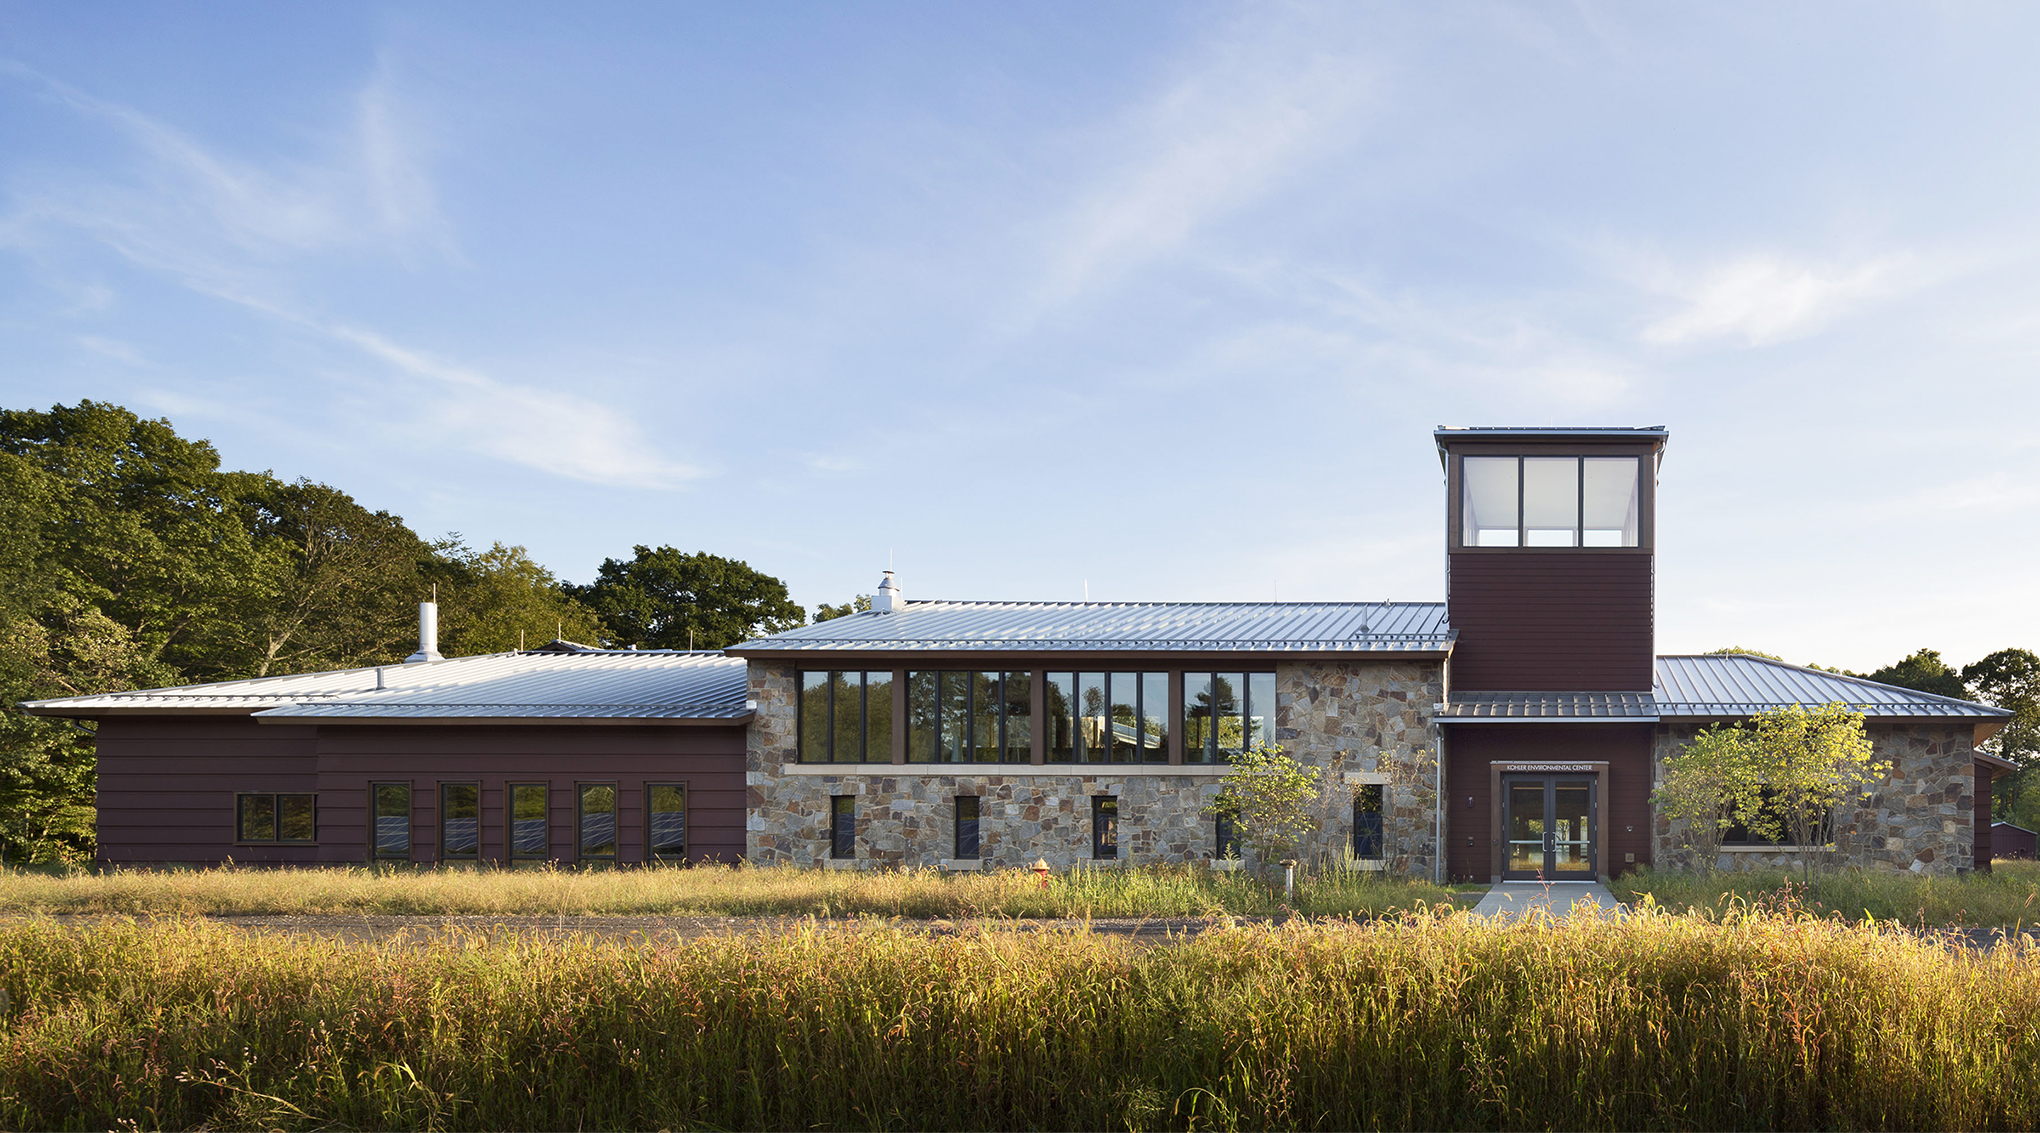 <p>West facade of the Kohler Environmental Center, viewed from campus. Photograph Peter Aaron / OTTO, 2012.</p>
